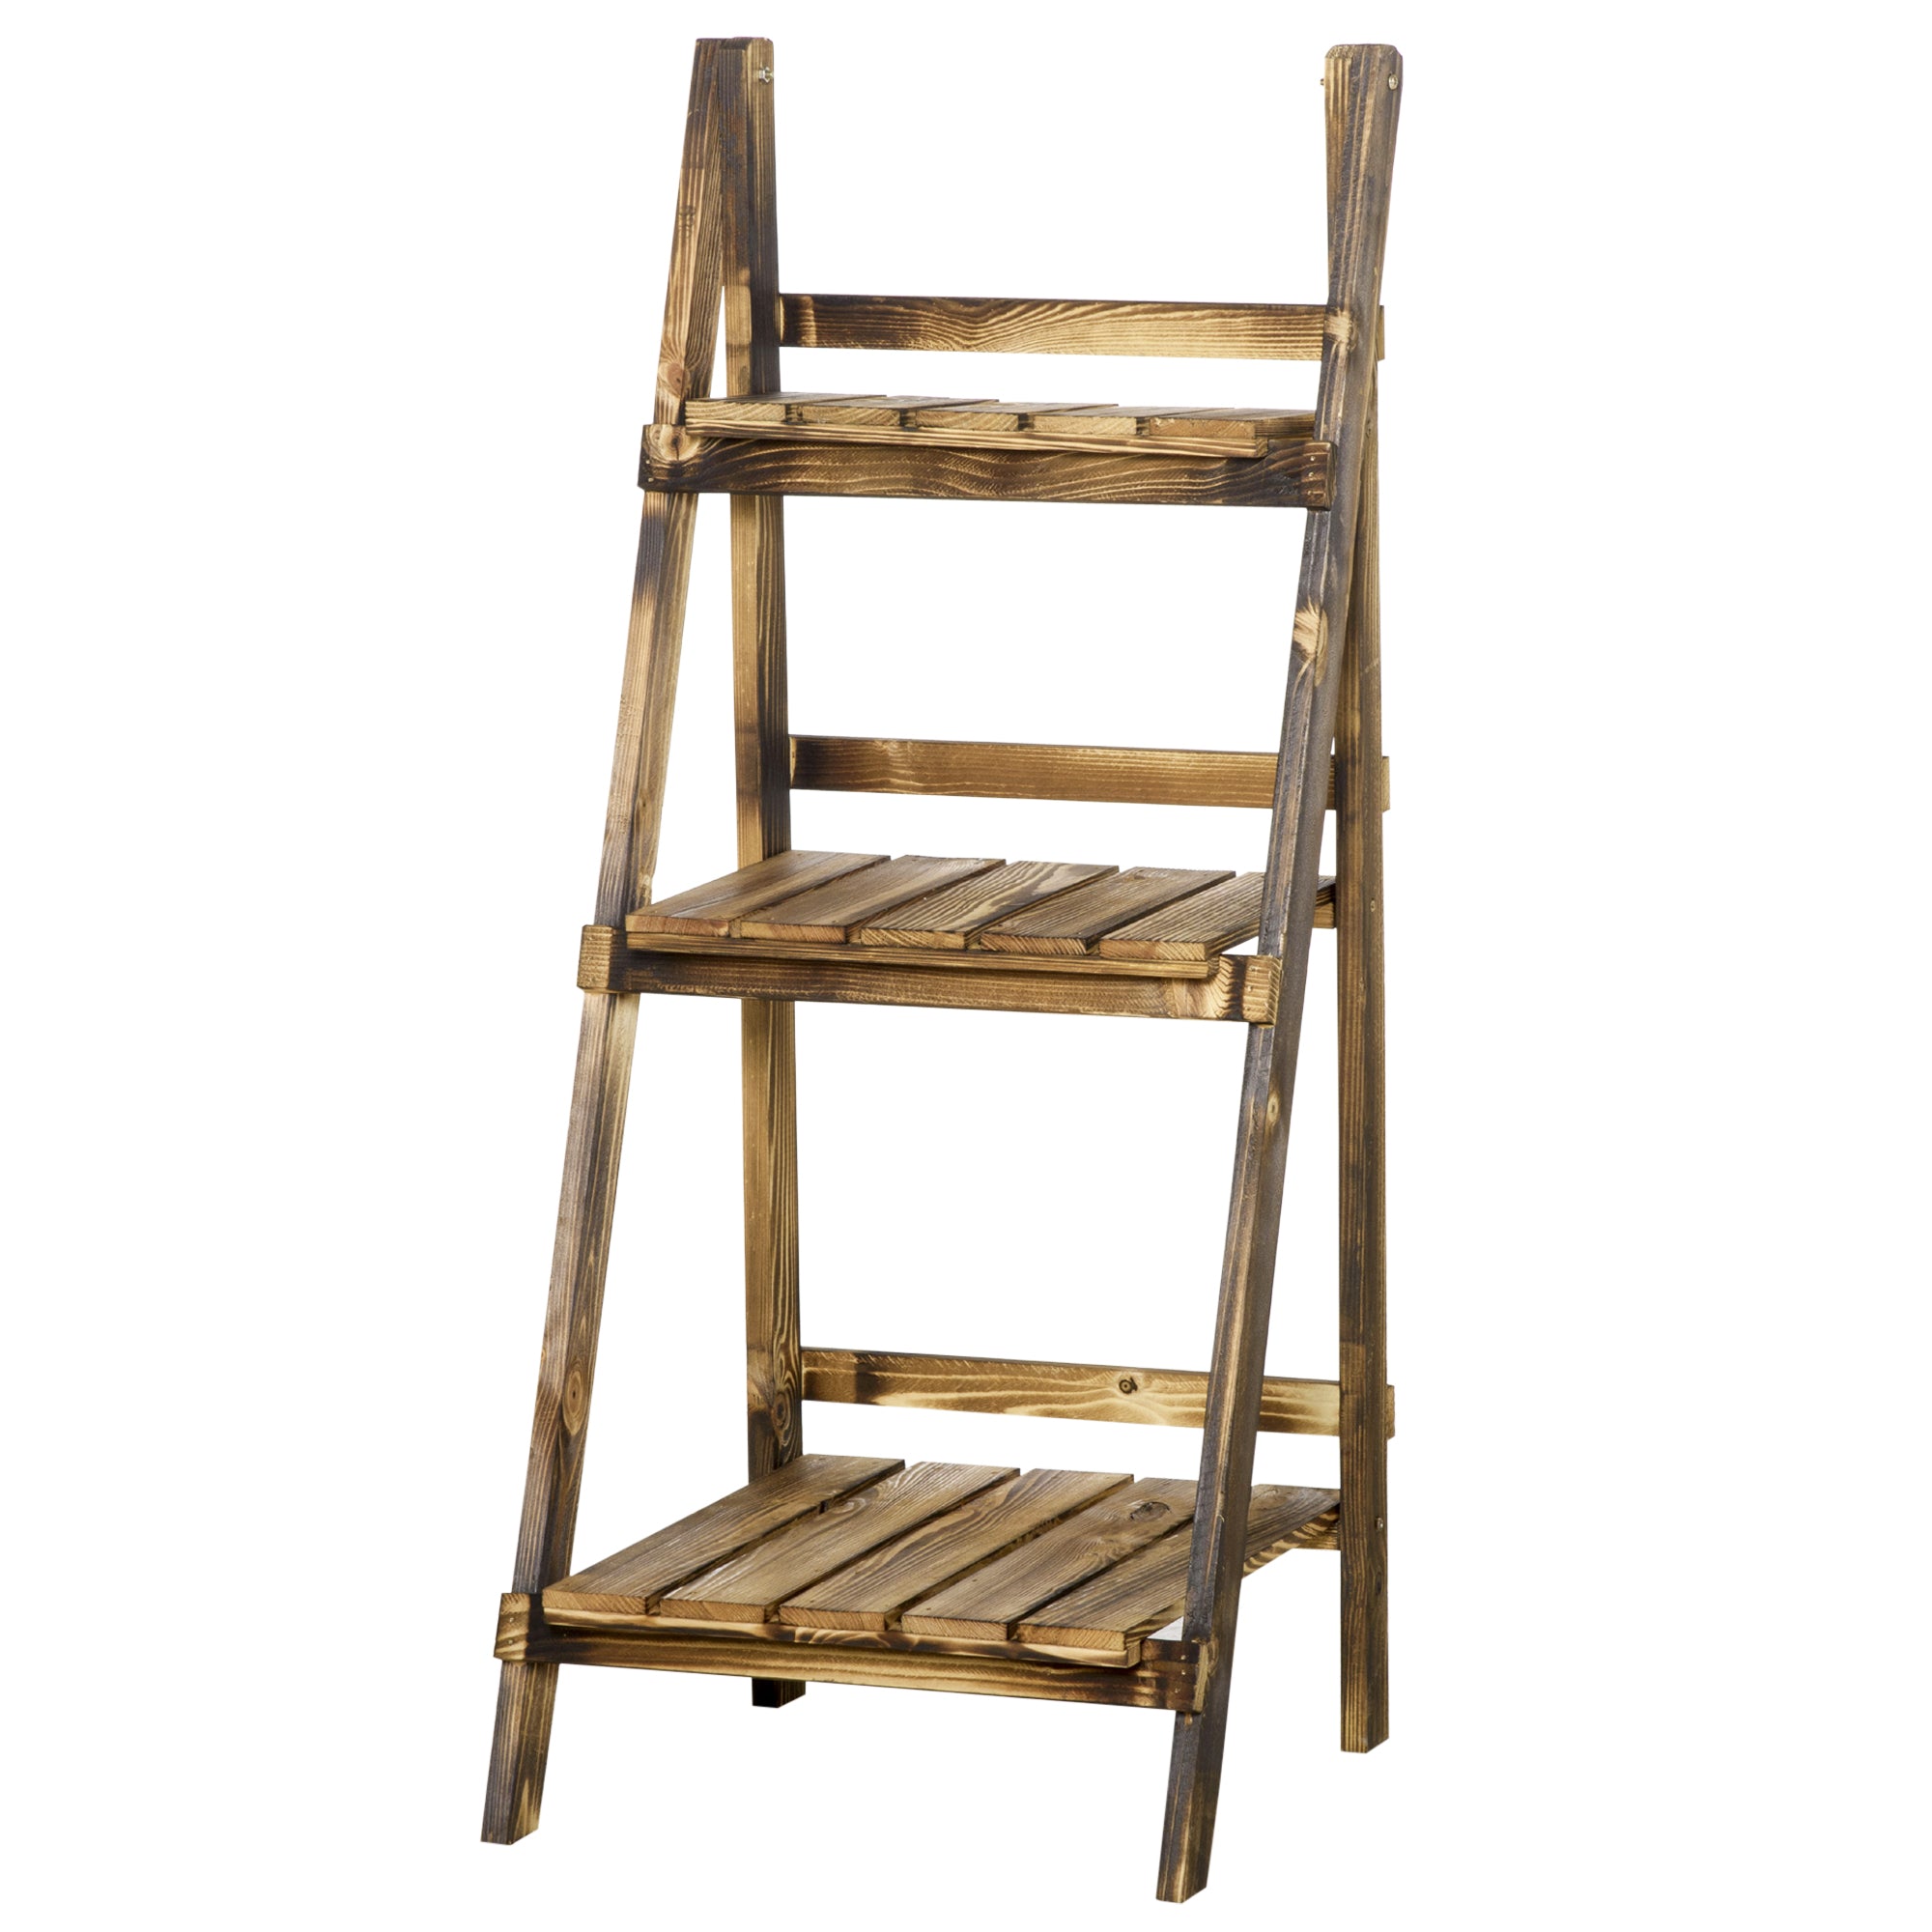 Outsunny 3 Tier Flower Stand Wood Folding Planter Ladder Display Shelf Rack for Garden Outdoor Backyard 40Lx37Wx93H(cm) - TovaHaus